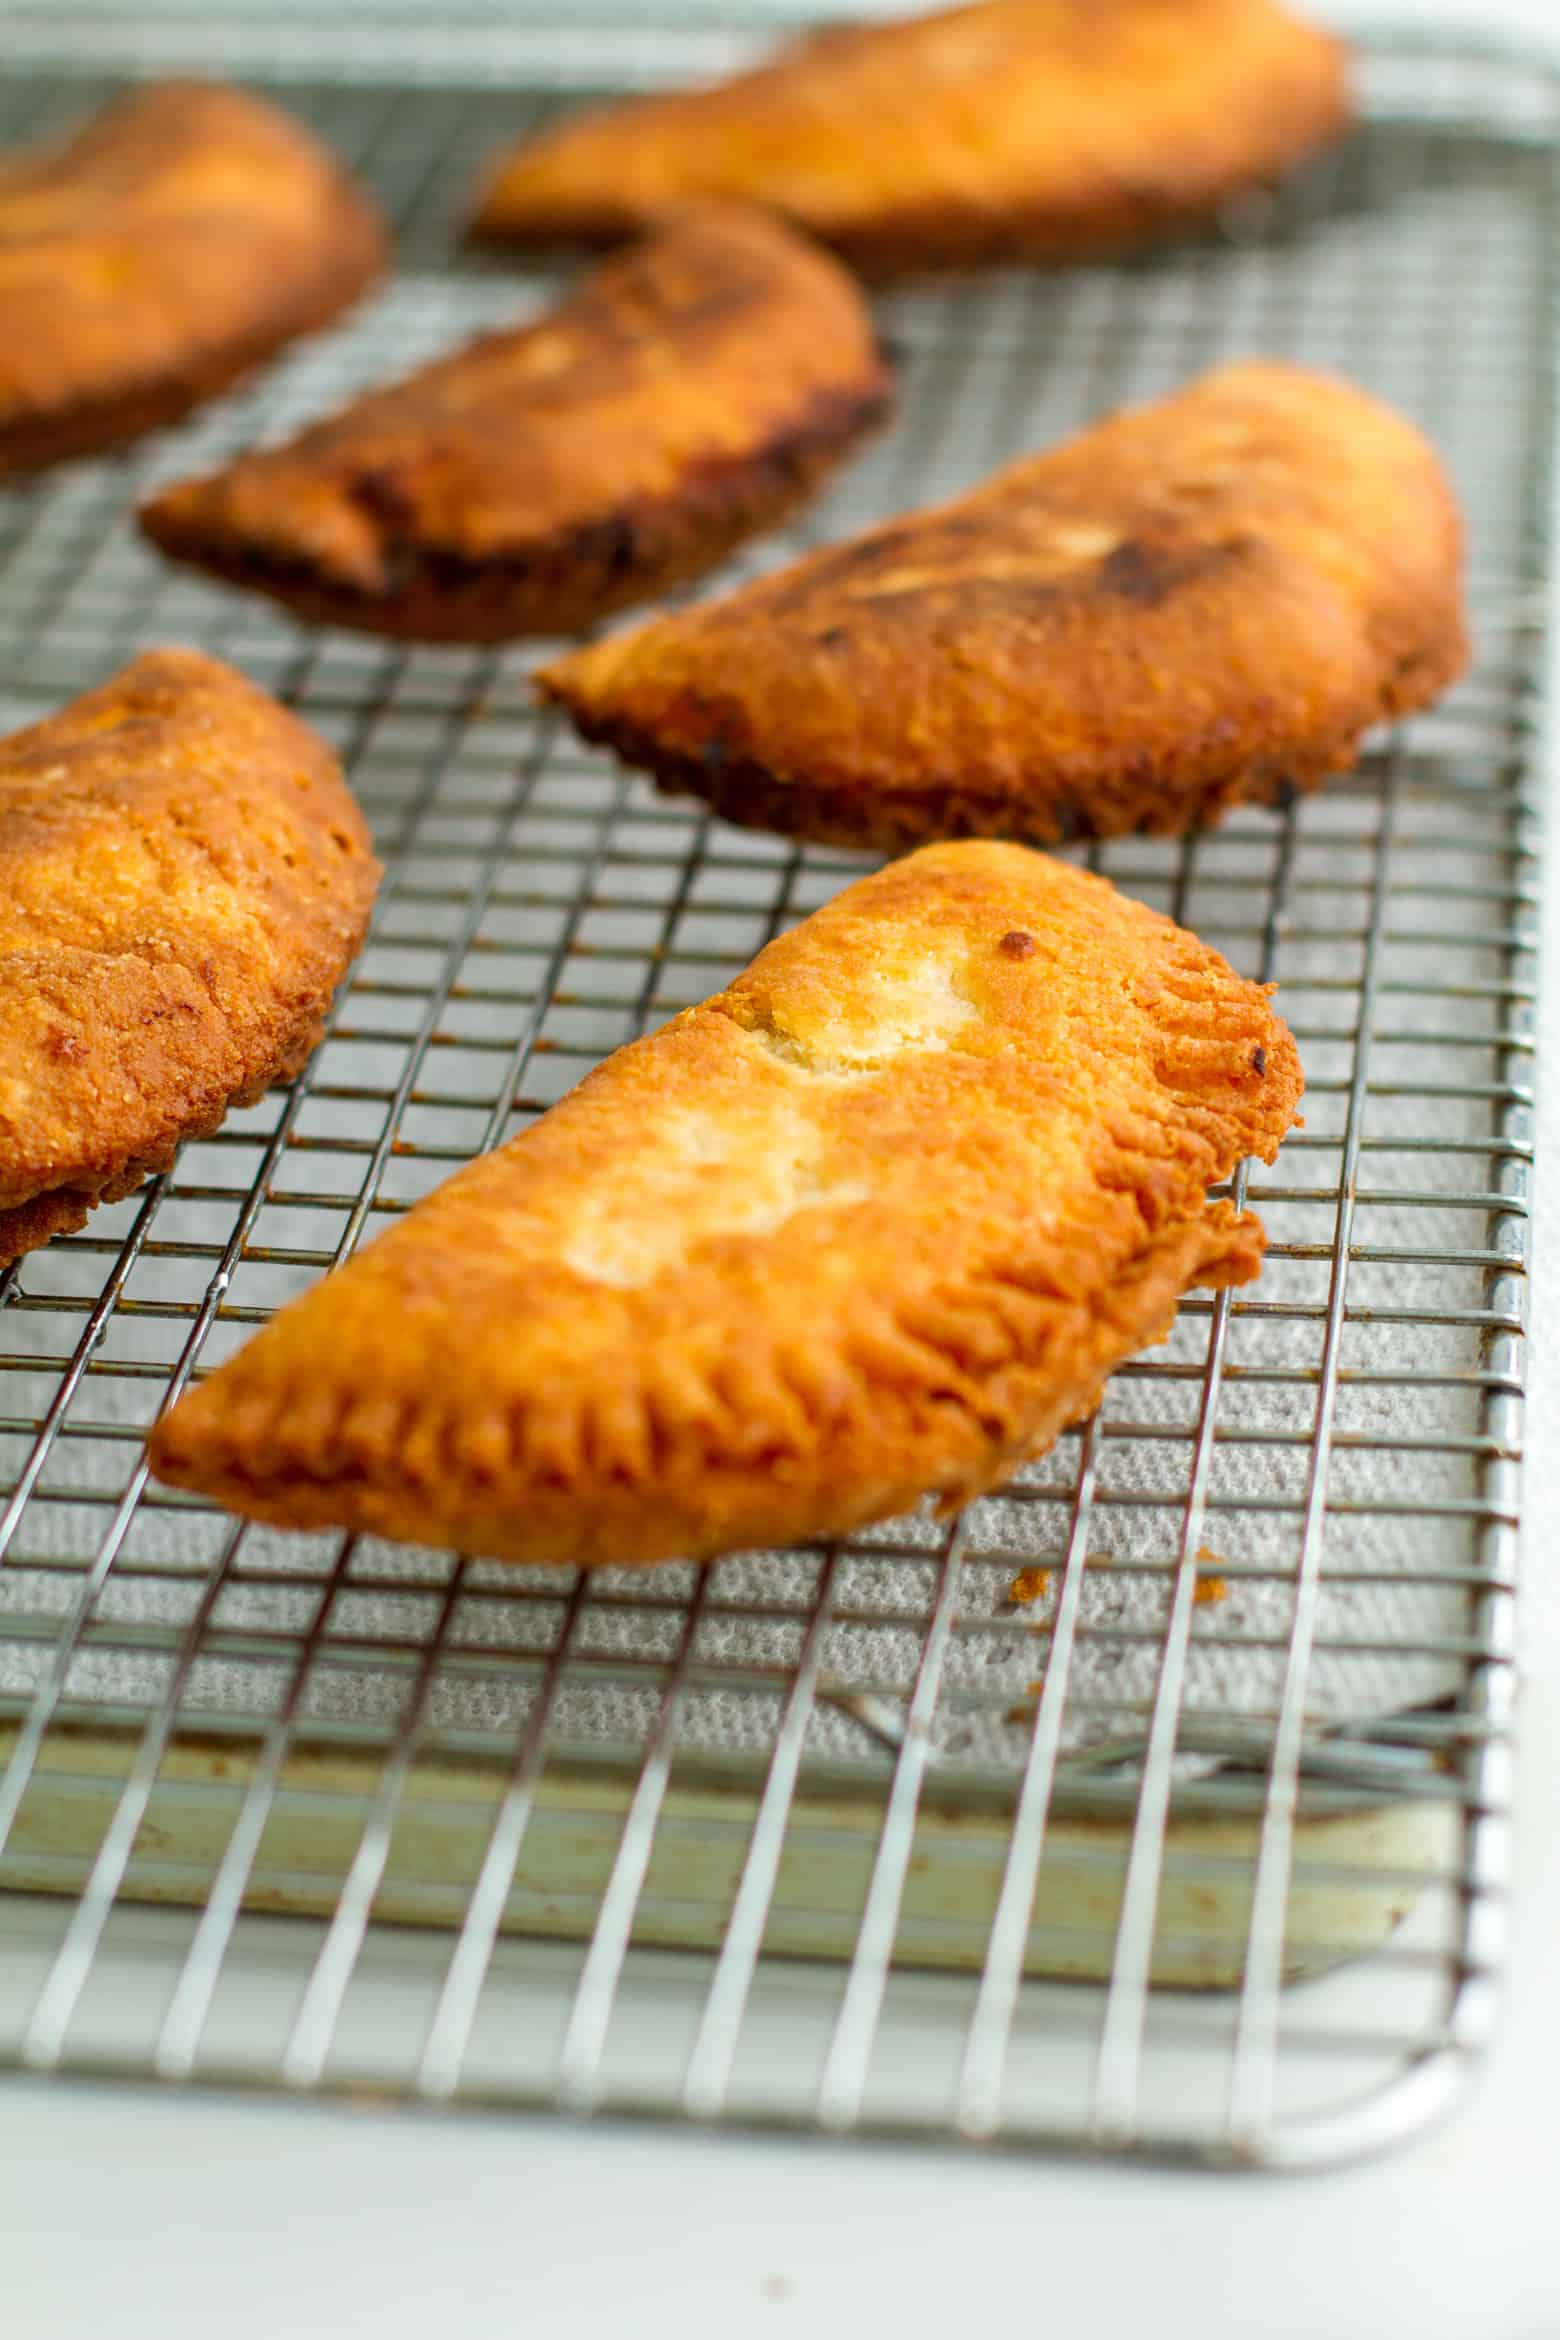 Fried pies cooling on a cooling rack.